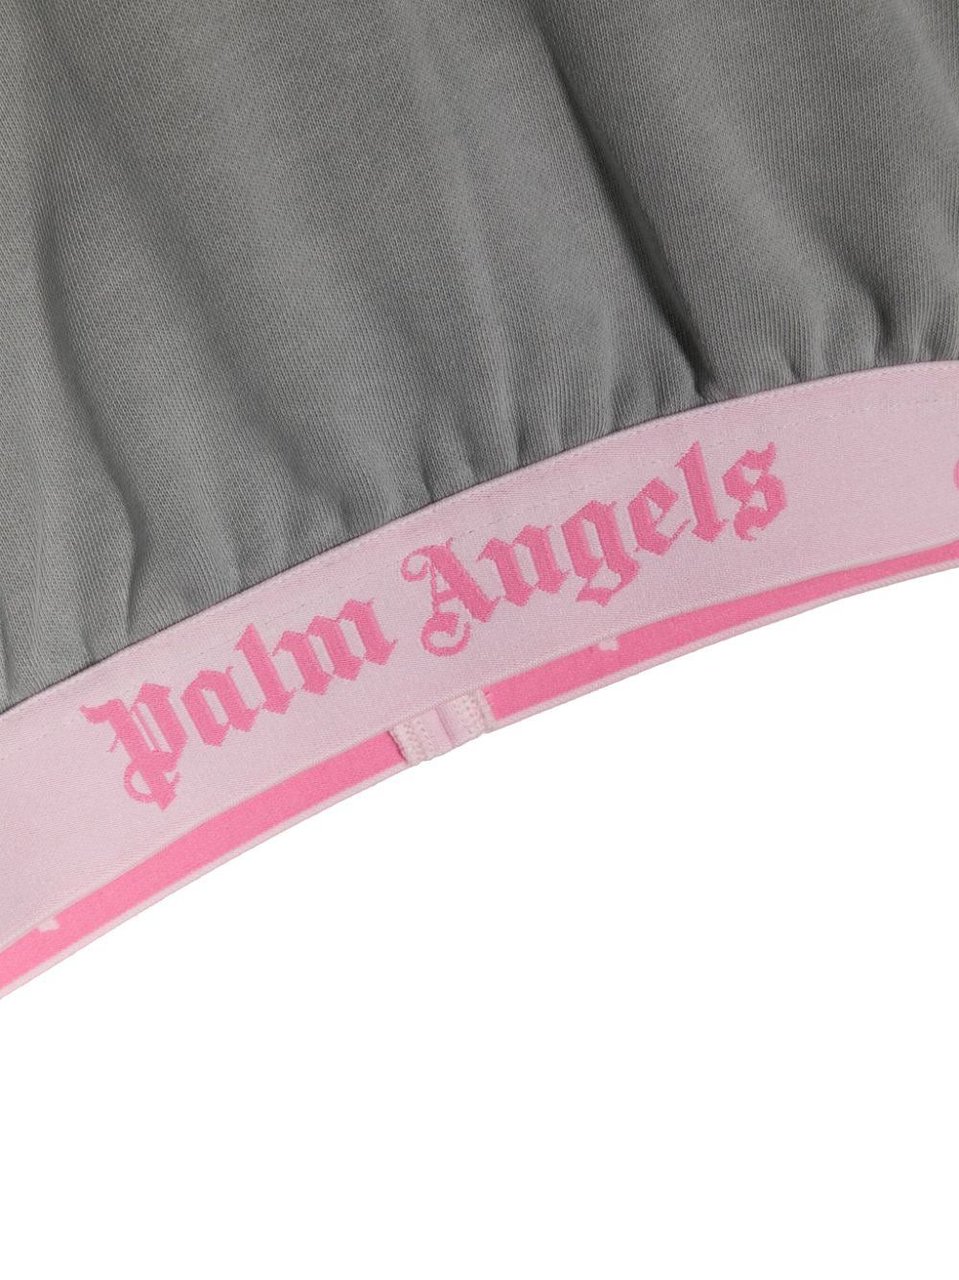 Palm Angels Palm Angels Sweaters Grey Grijs